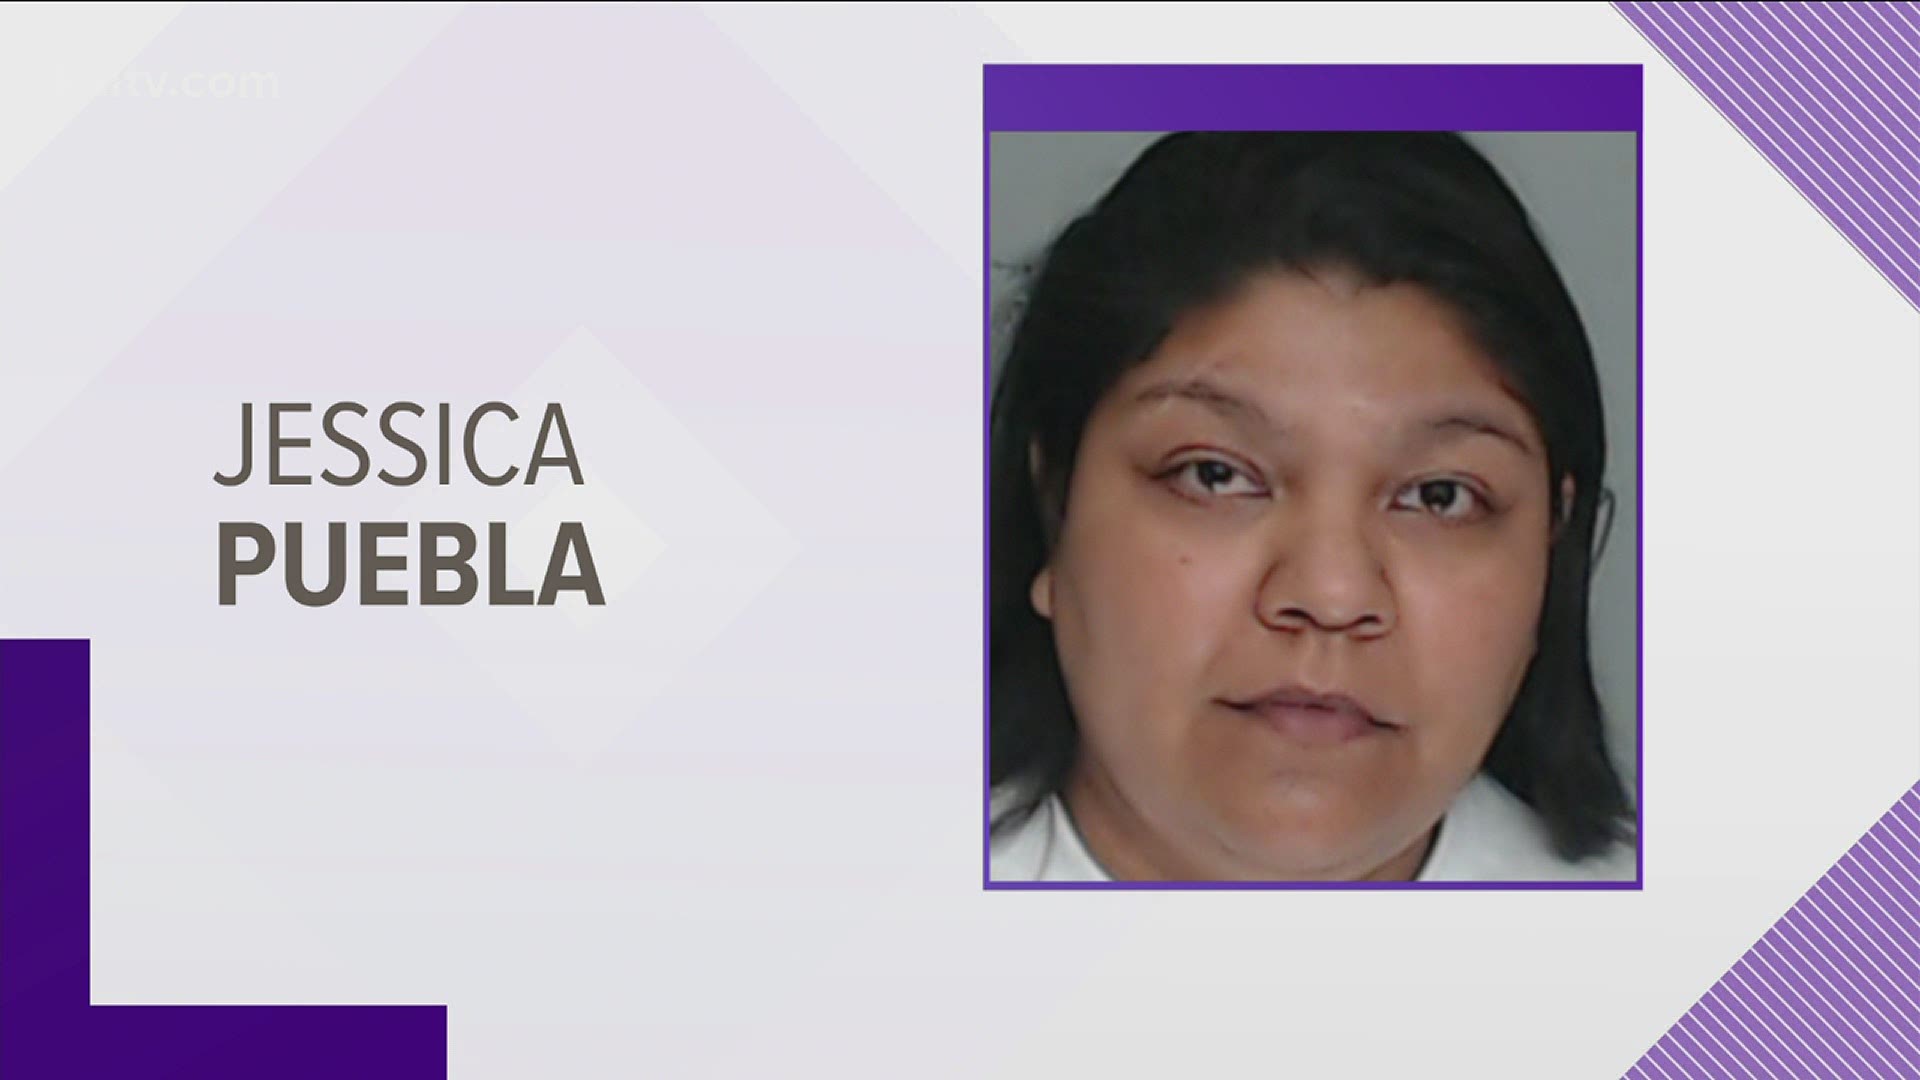 33-year-old Jessica Puebla was arrested on aggravated assault and failure to identify as a fugitive.